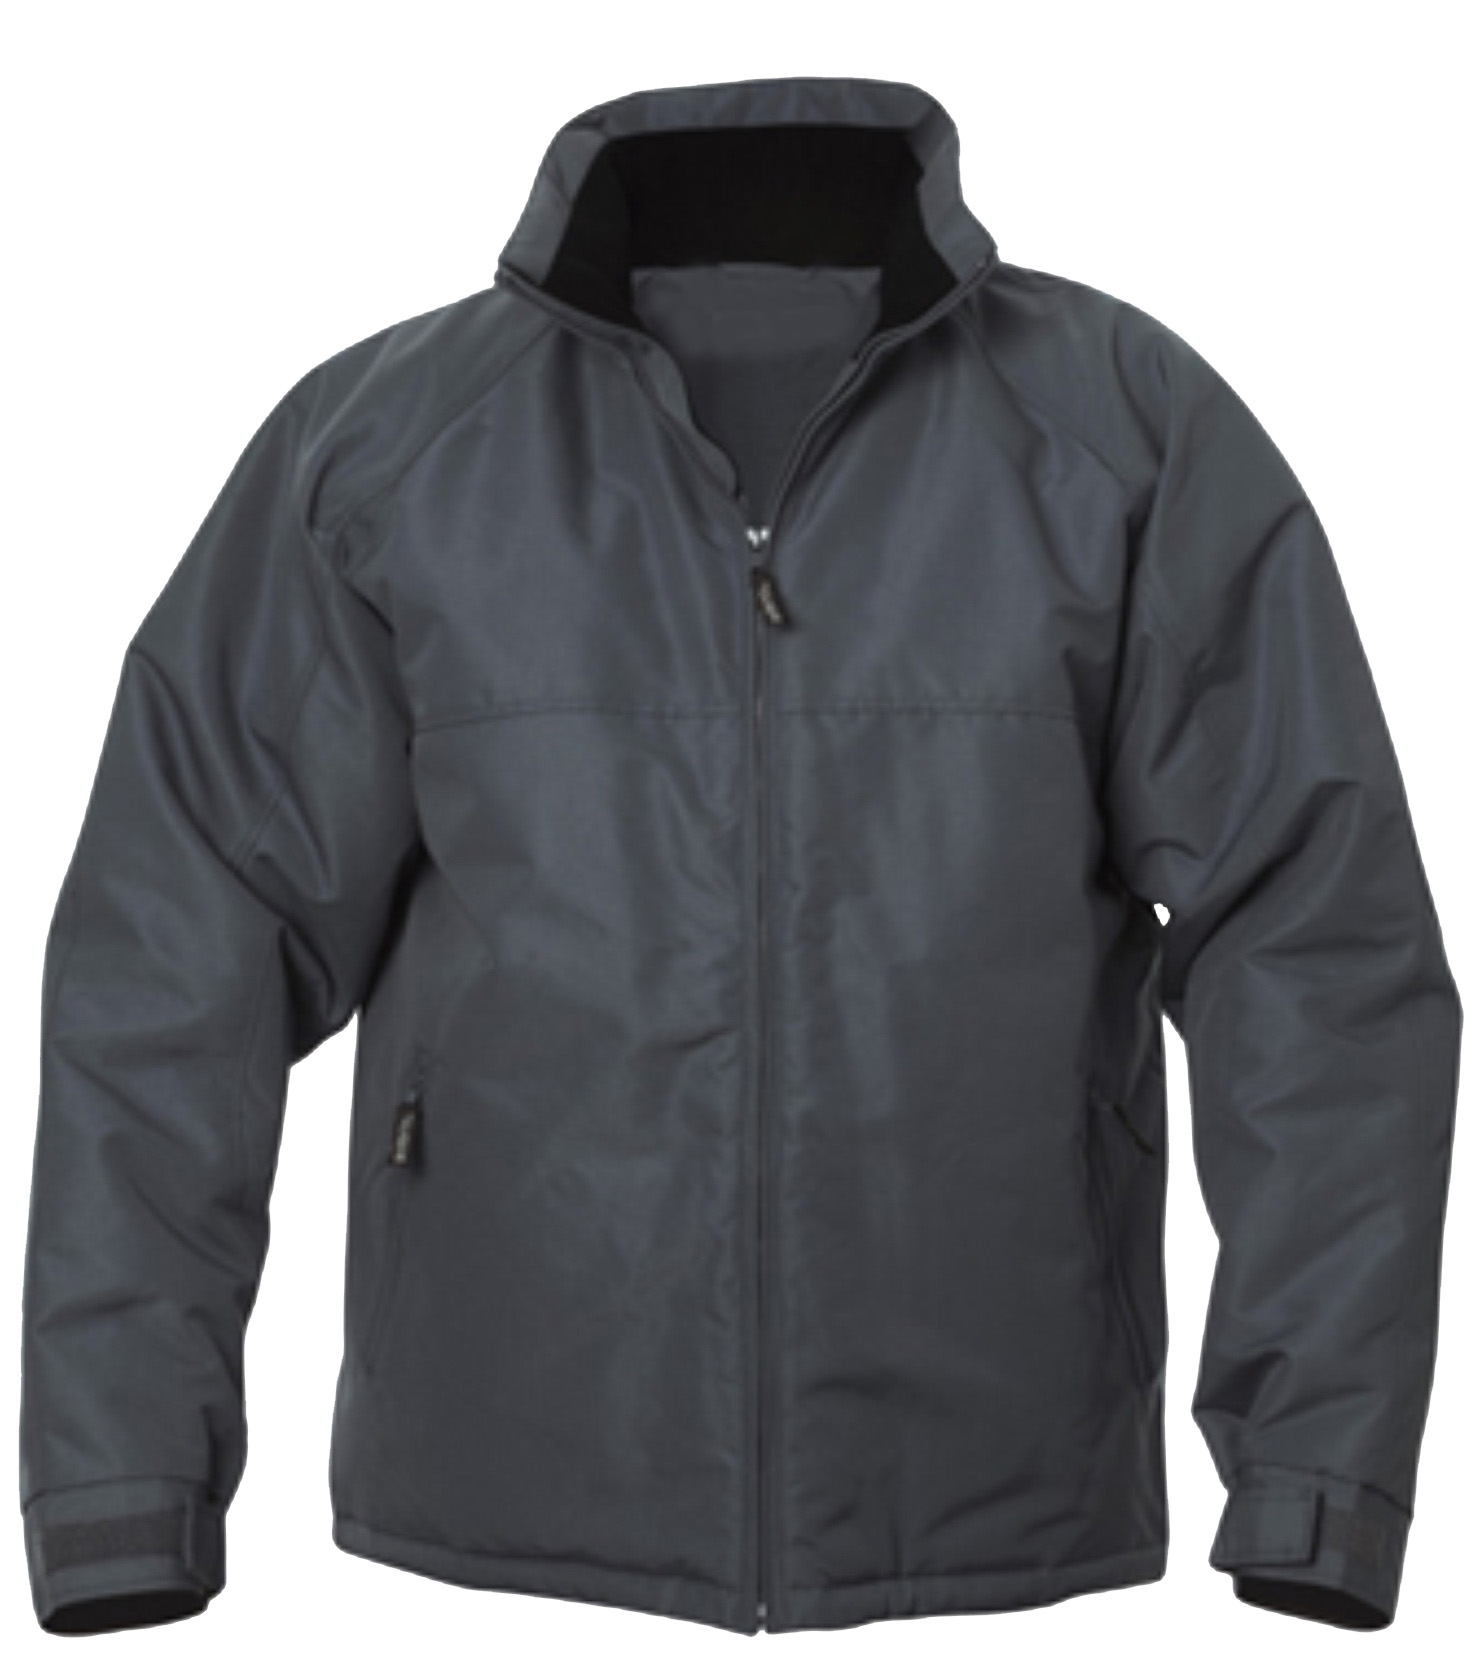 SAHARA JACKET - Corporate Clothing | High Quality Embroidered Workwear ...